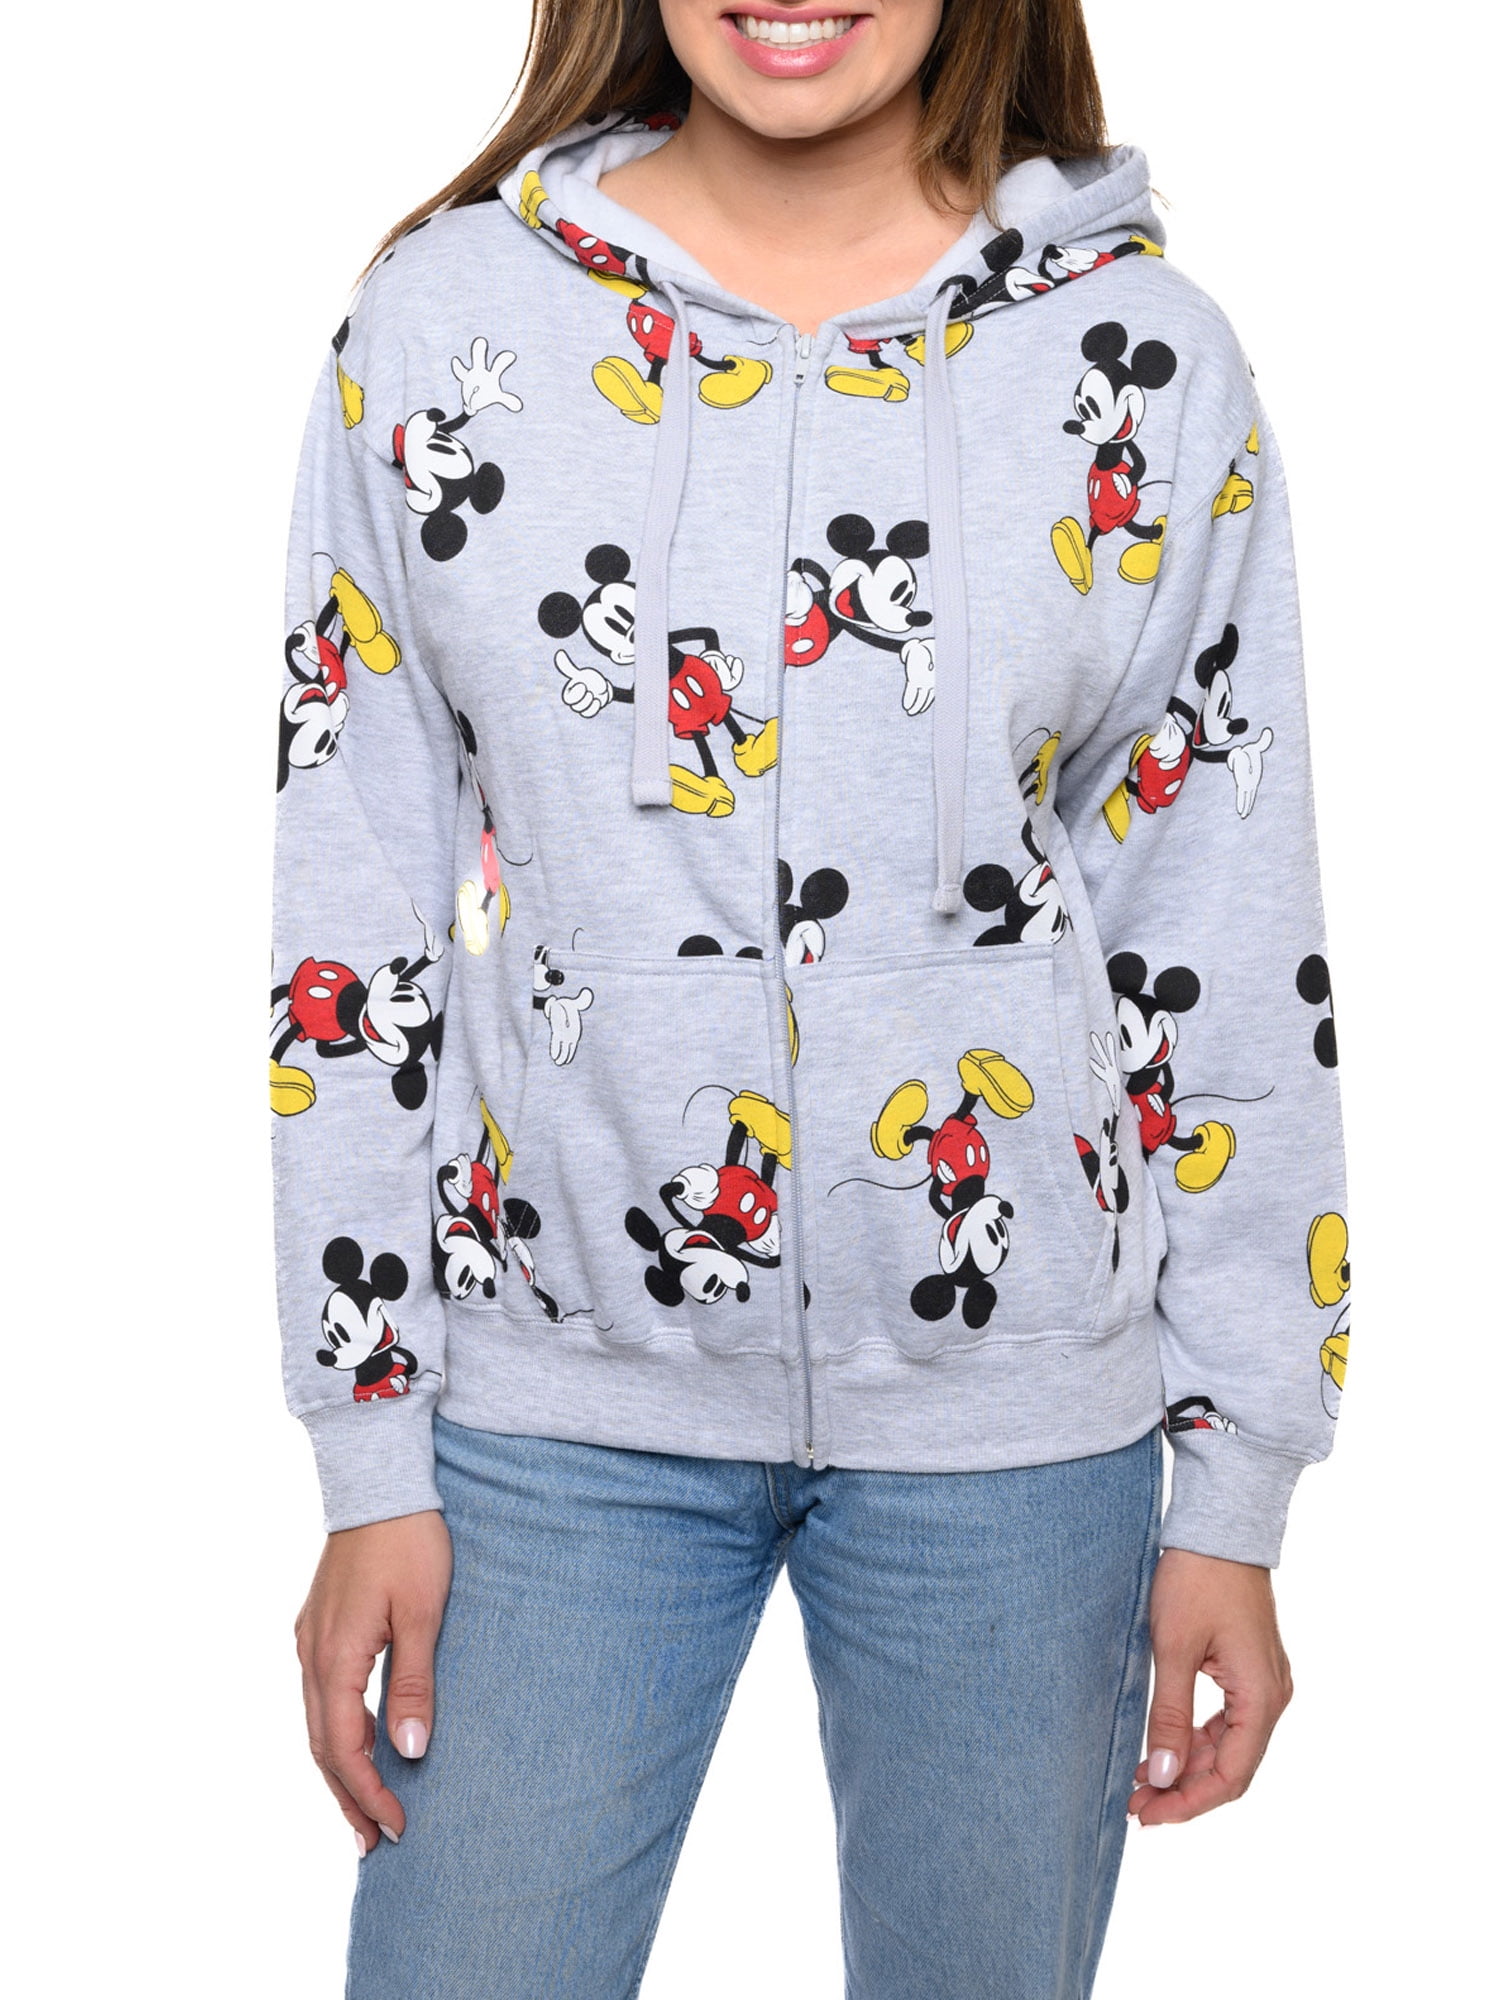 Love Denim & Mickey? Disney Just Released Two Items You'll ACTUALLY Use in  the Parks!